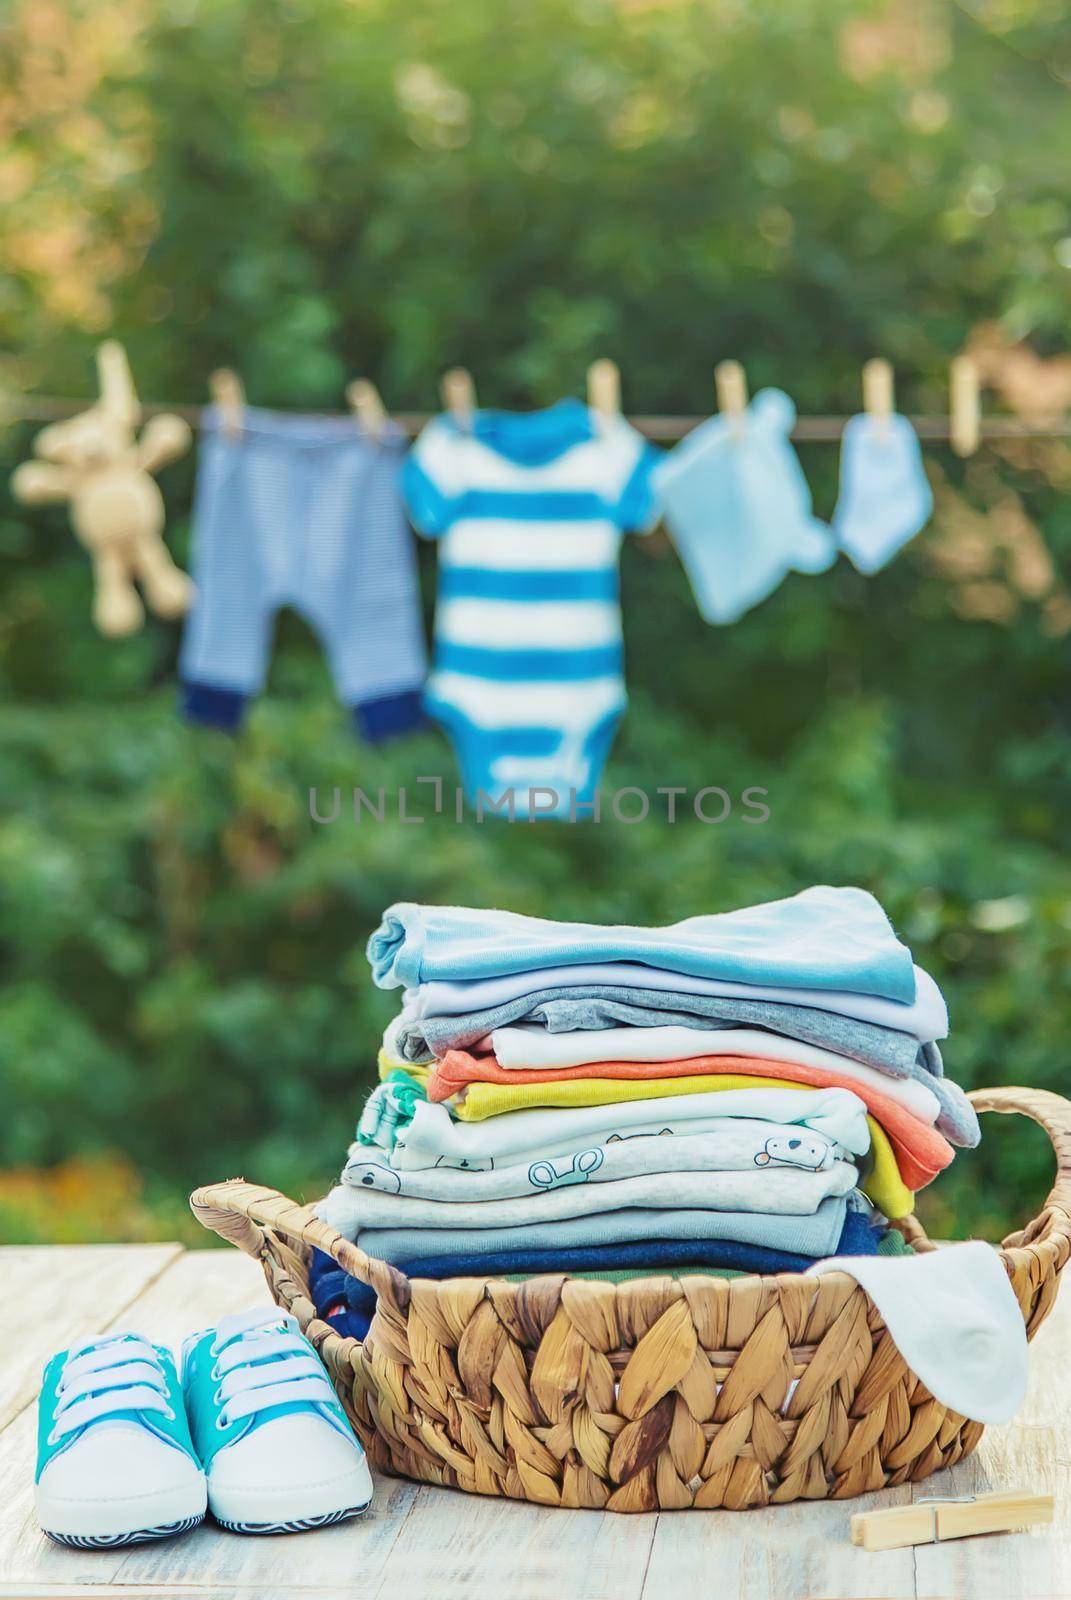 washing baby clothes. Linen dries in the fresh air. Selective focus. by yanadjana